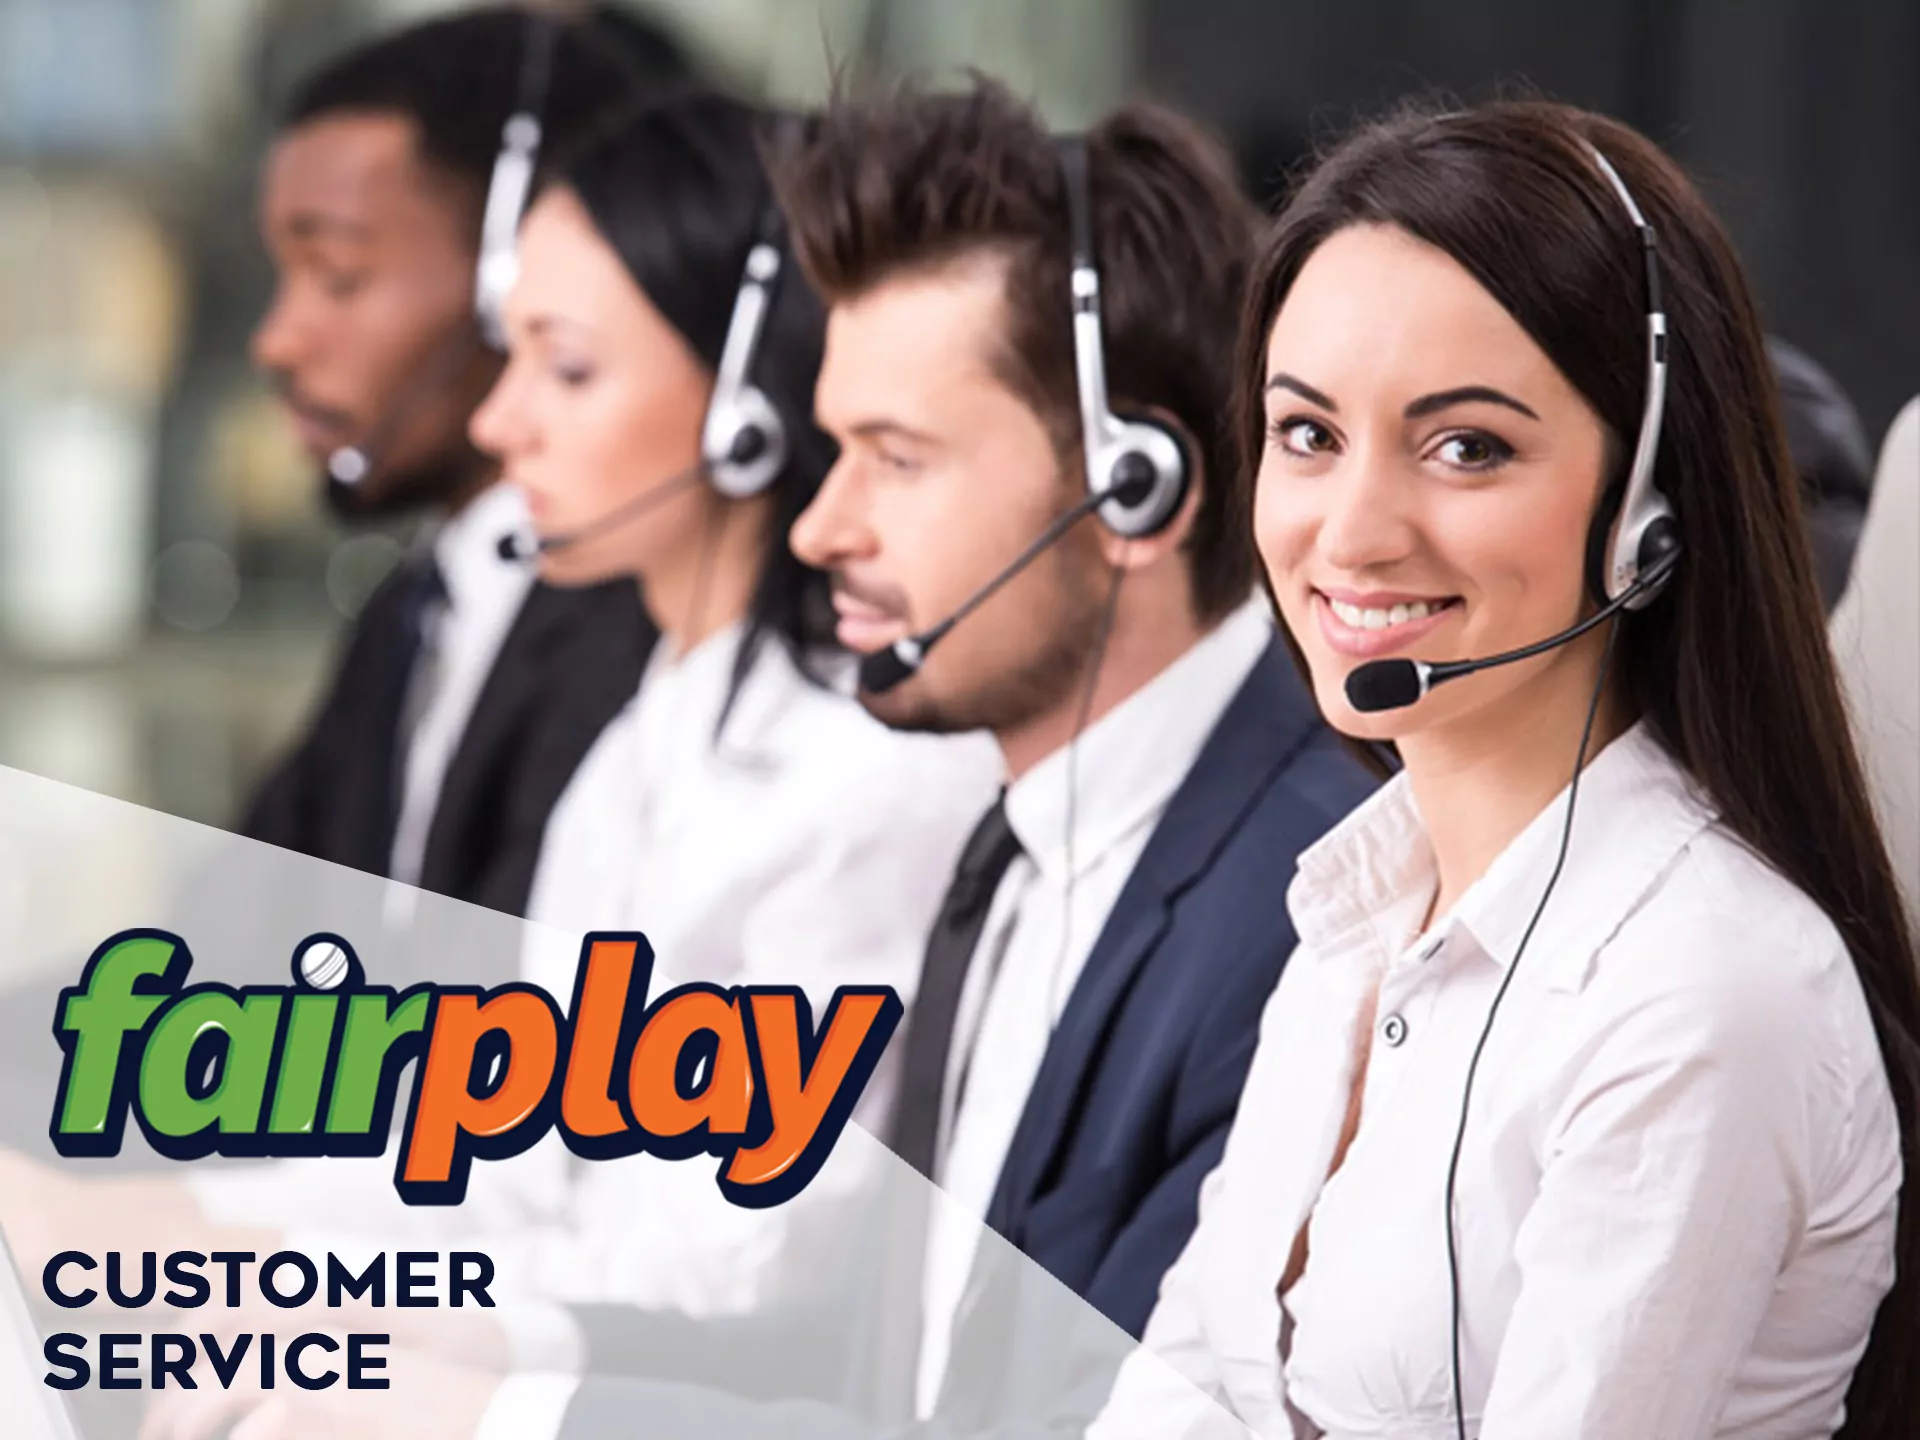 Fairplay has a very fast and friendly customer support team.